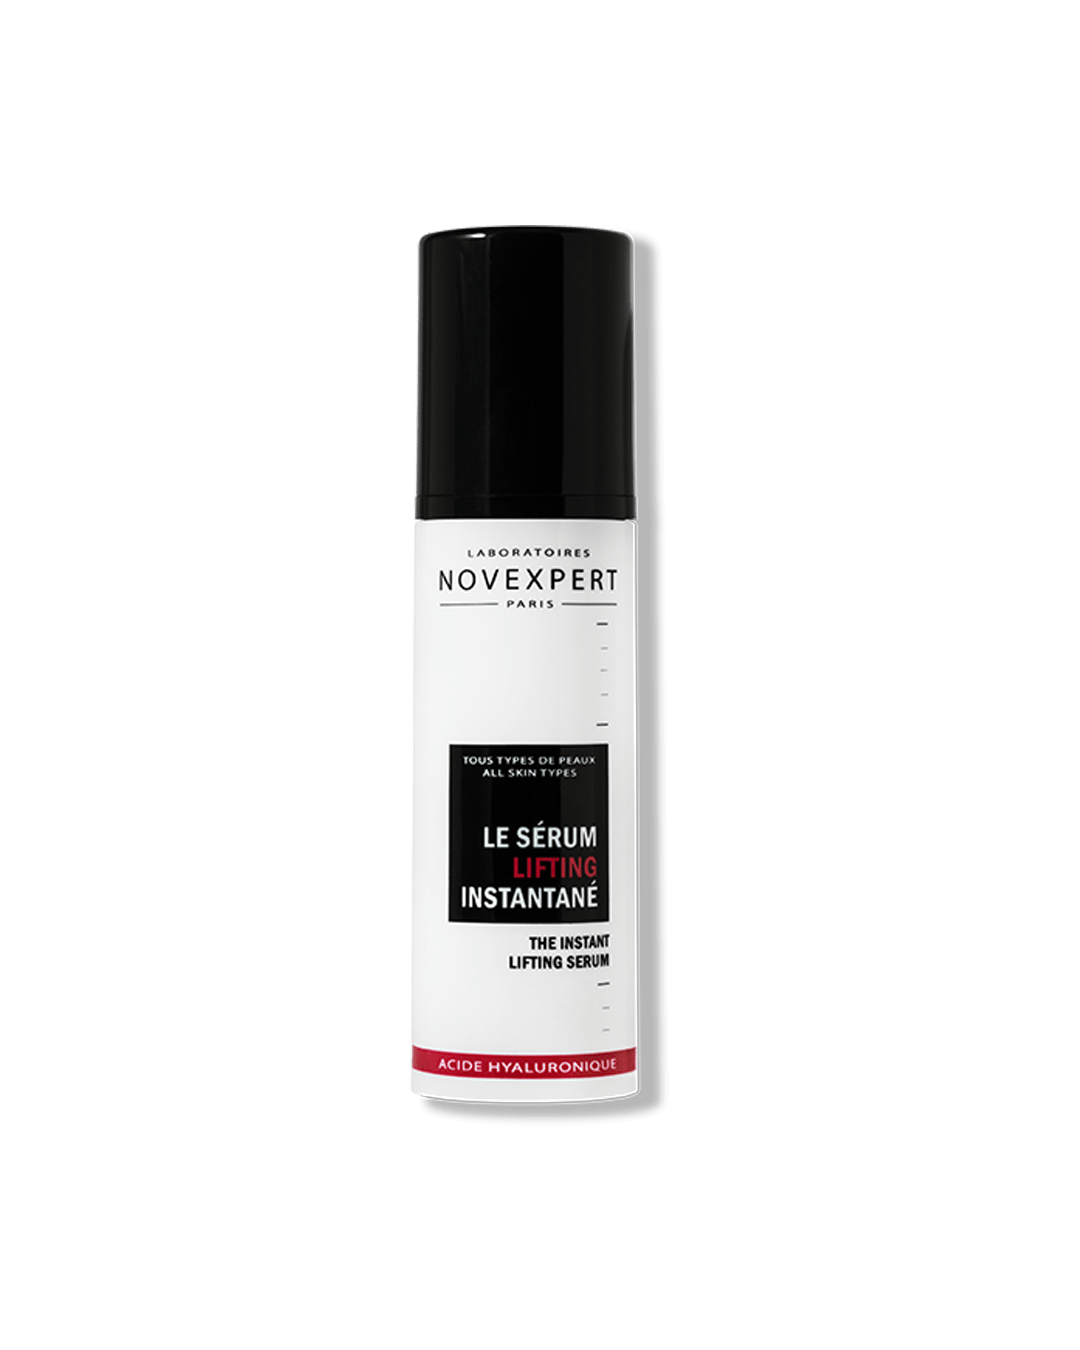 The Instant Lifting Serum